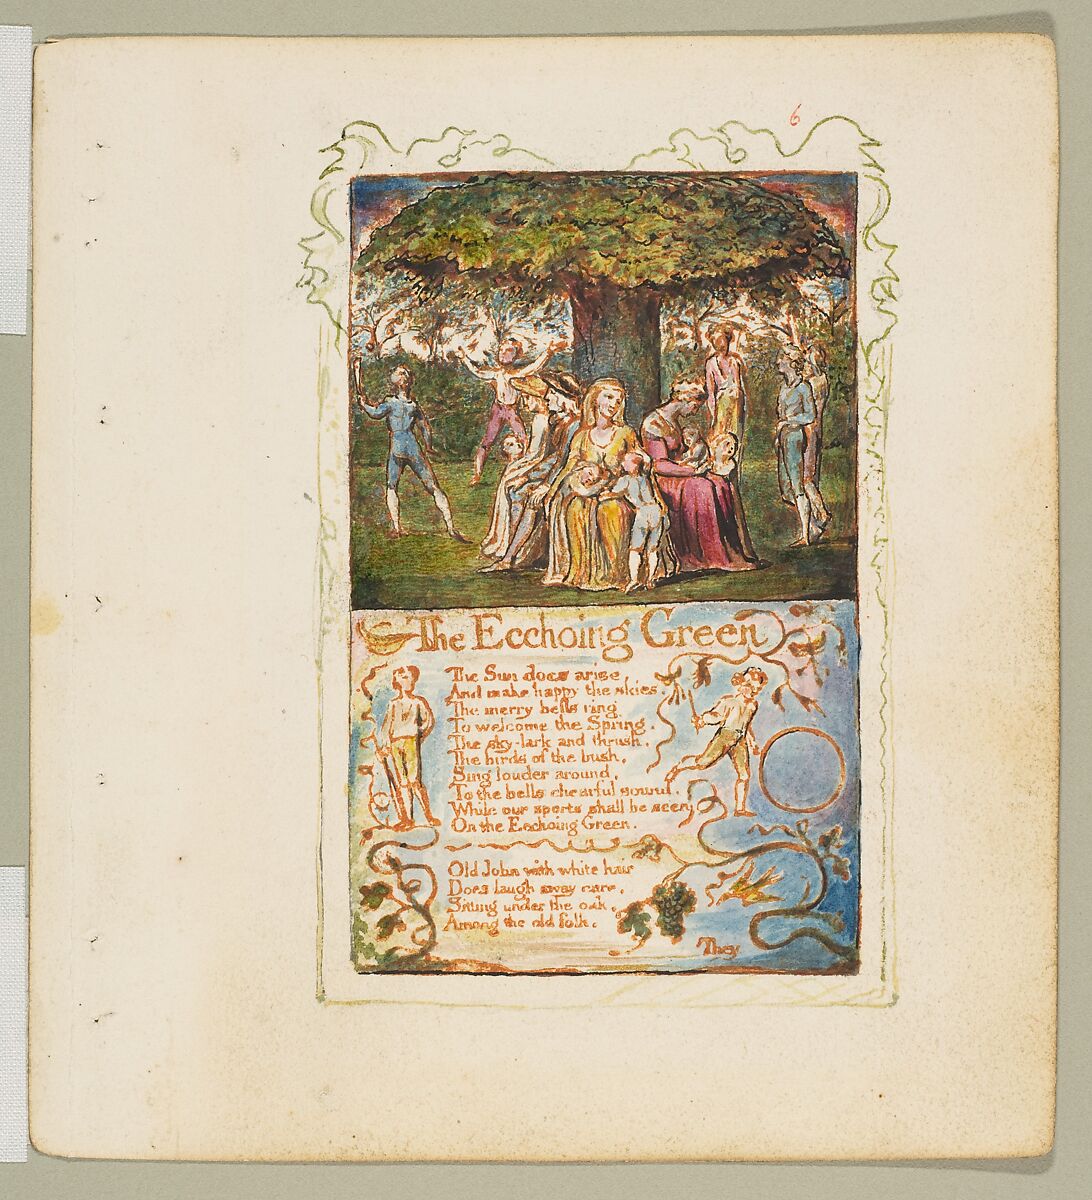 Songs of Innocence: The Ecchoing Green, William Blake  British, Relief etching printed in orange-brown ink and hand-colored with watercolor and shell gold